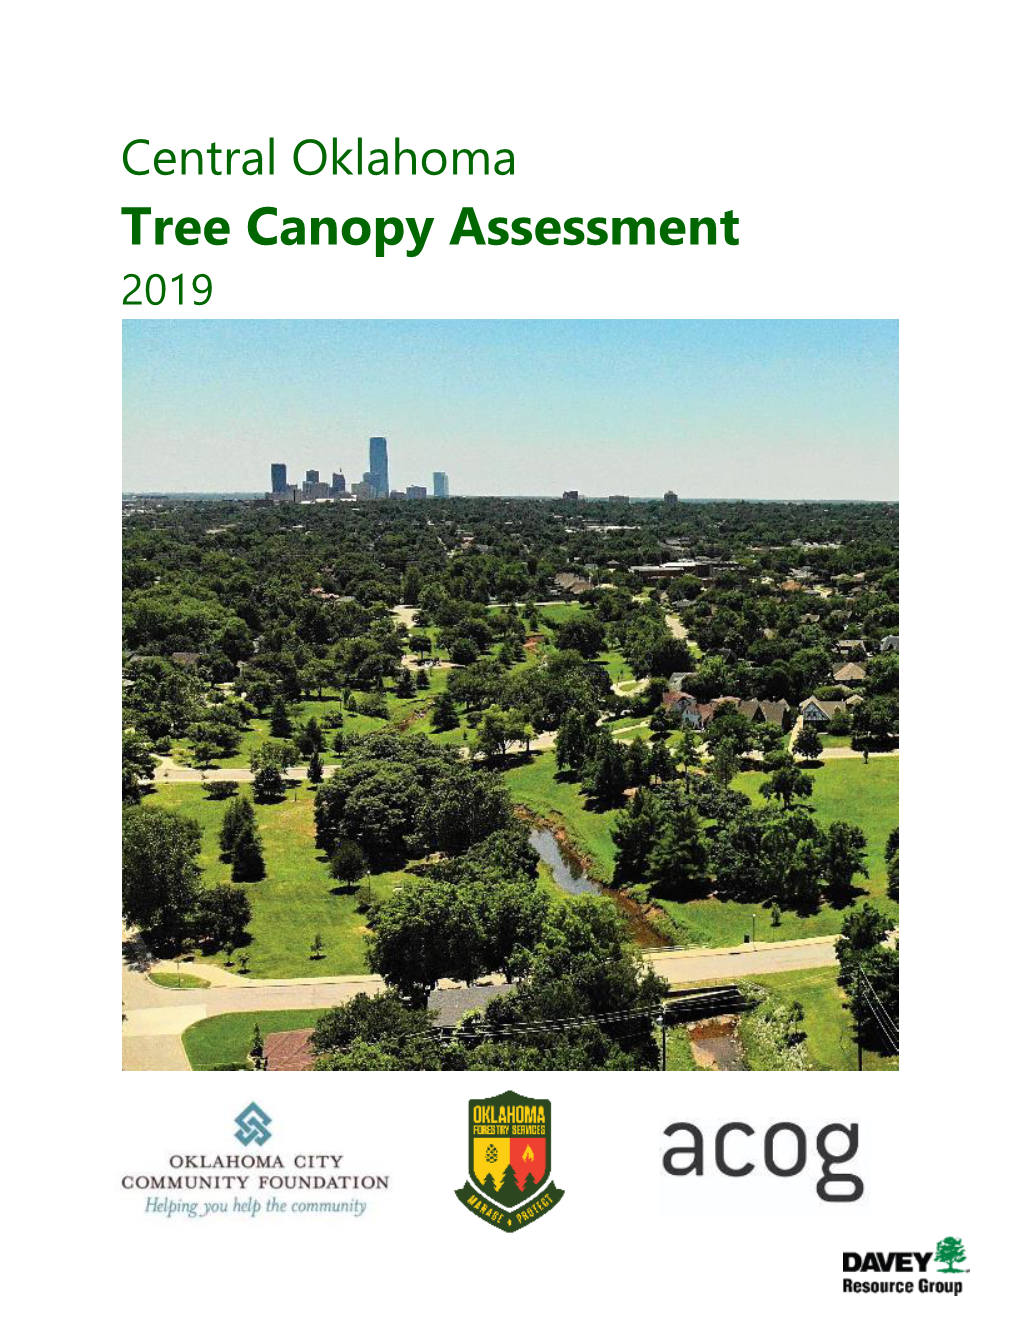 Central Oklahoma Tree Canopy Assessment 2019